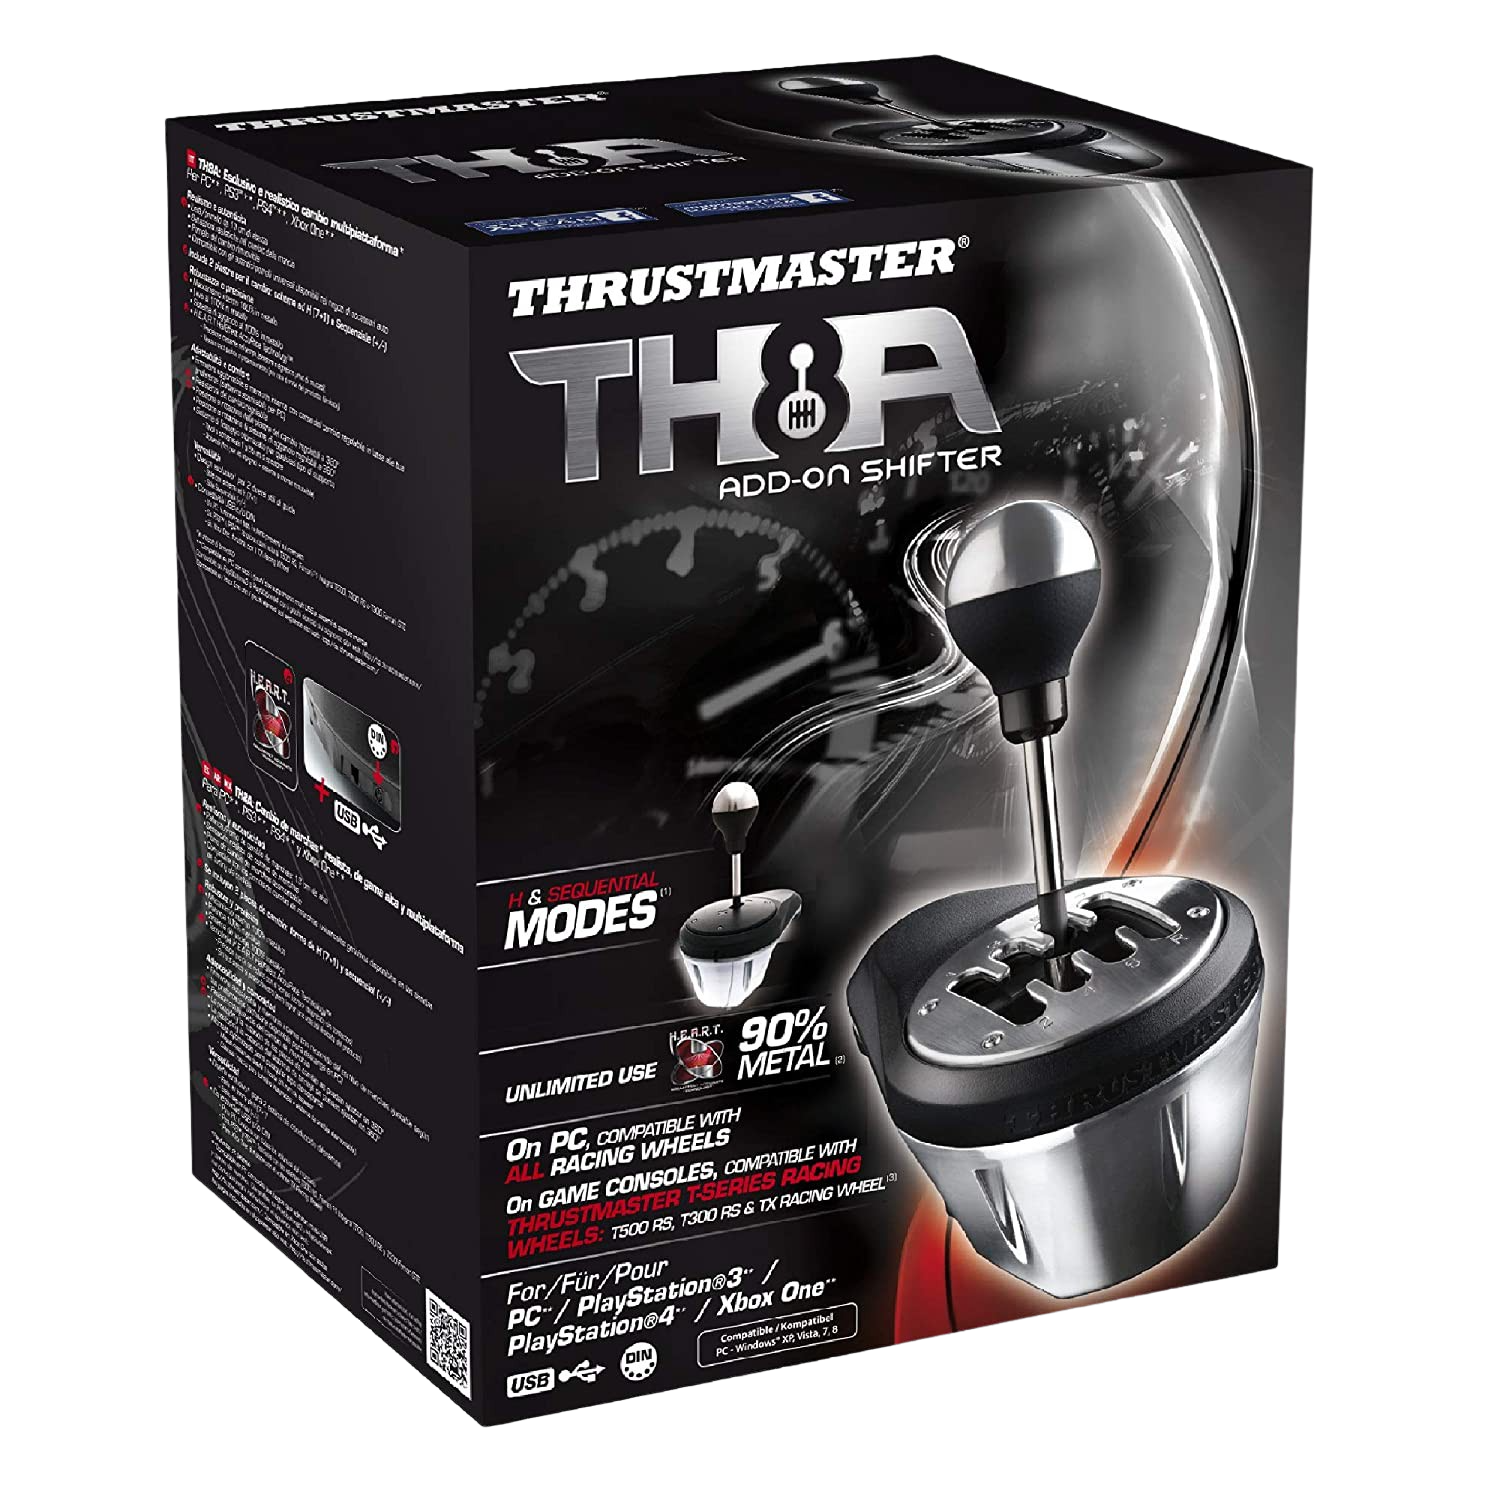 Rent Thrustmaster TH8A Add-On Gear Shifter from $9.90 per month